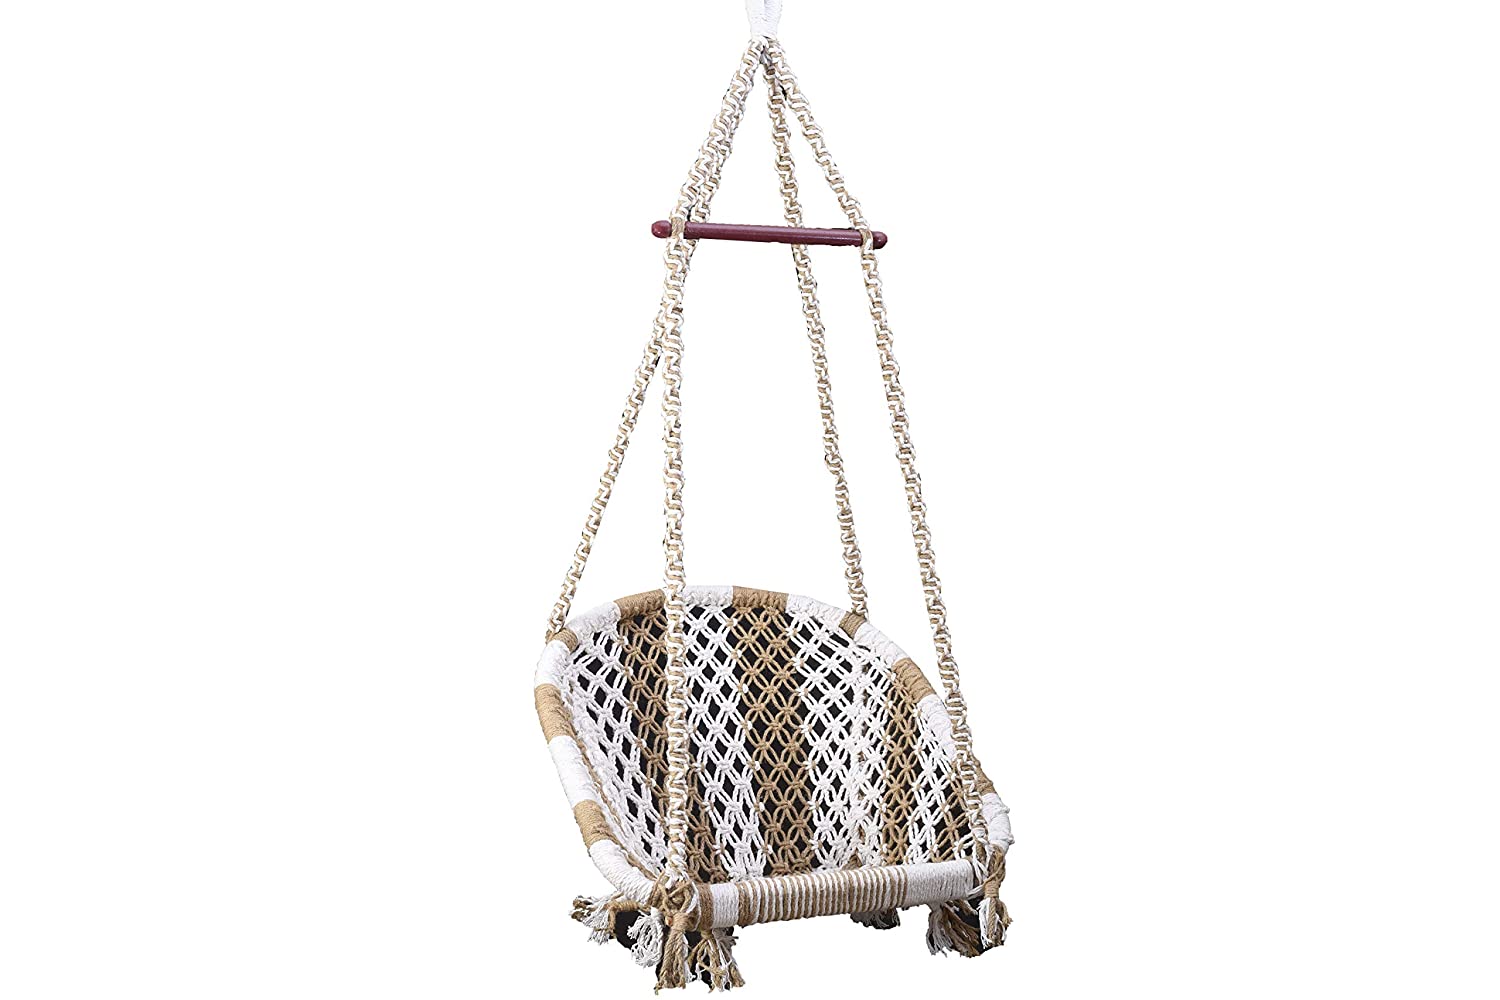 Halder Jute Regular Indoor Outdoor D Shape Hanging Swing Chair (Cotton, White, 150 * 65 * 72 cm)-Most Comfortable Swing Chair for Home